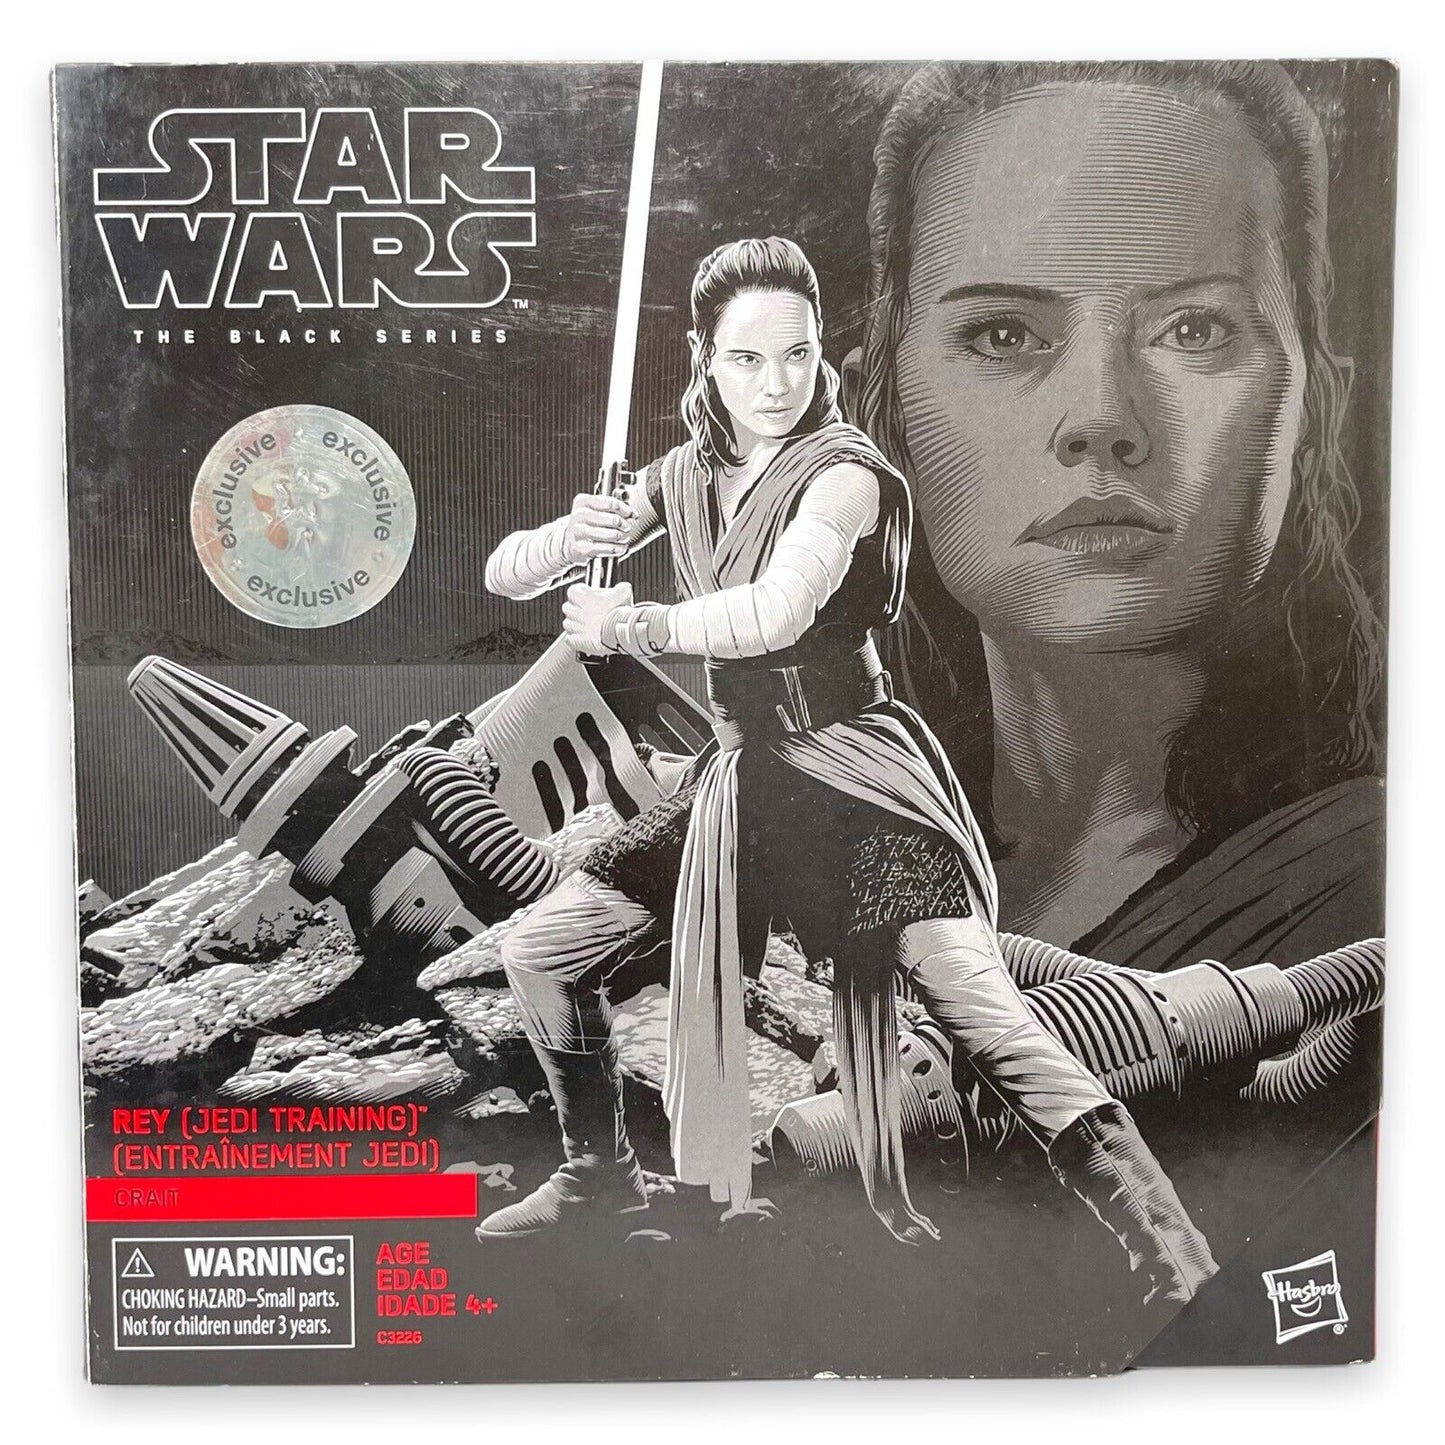 Star Wars The Black Series Rey Jedi Training Toys R Us Exclusive New